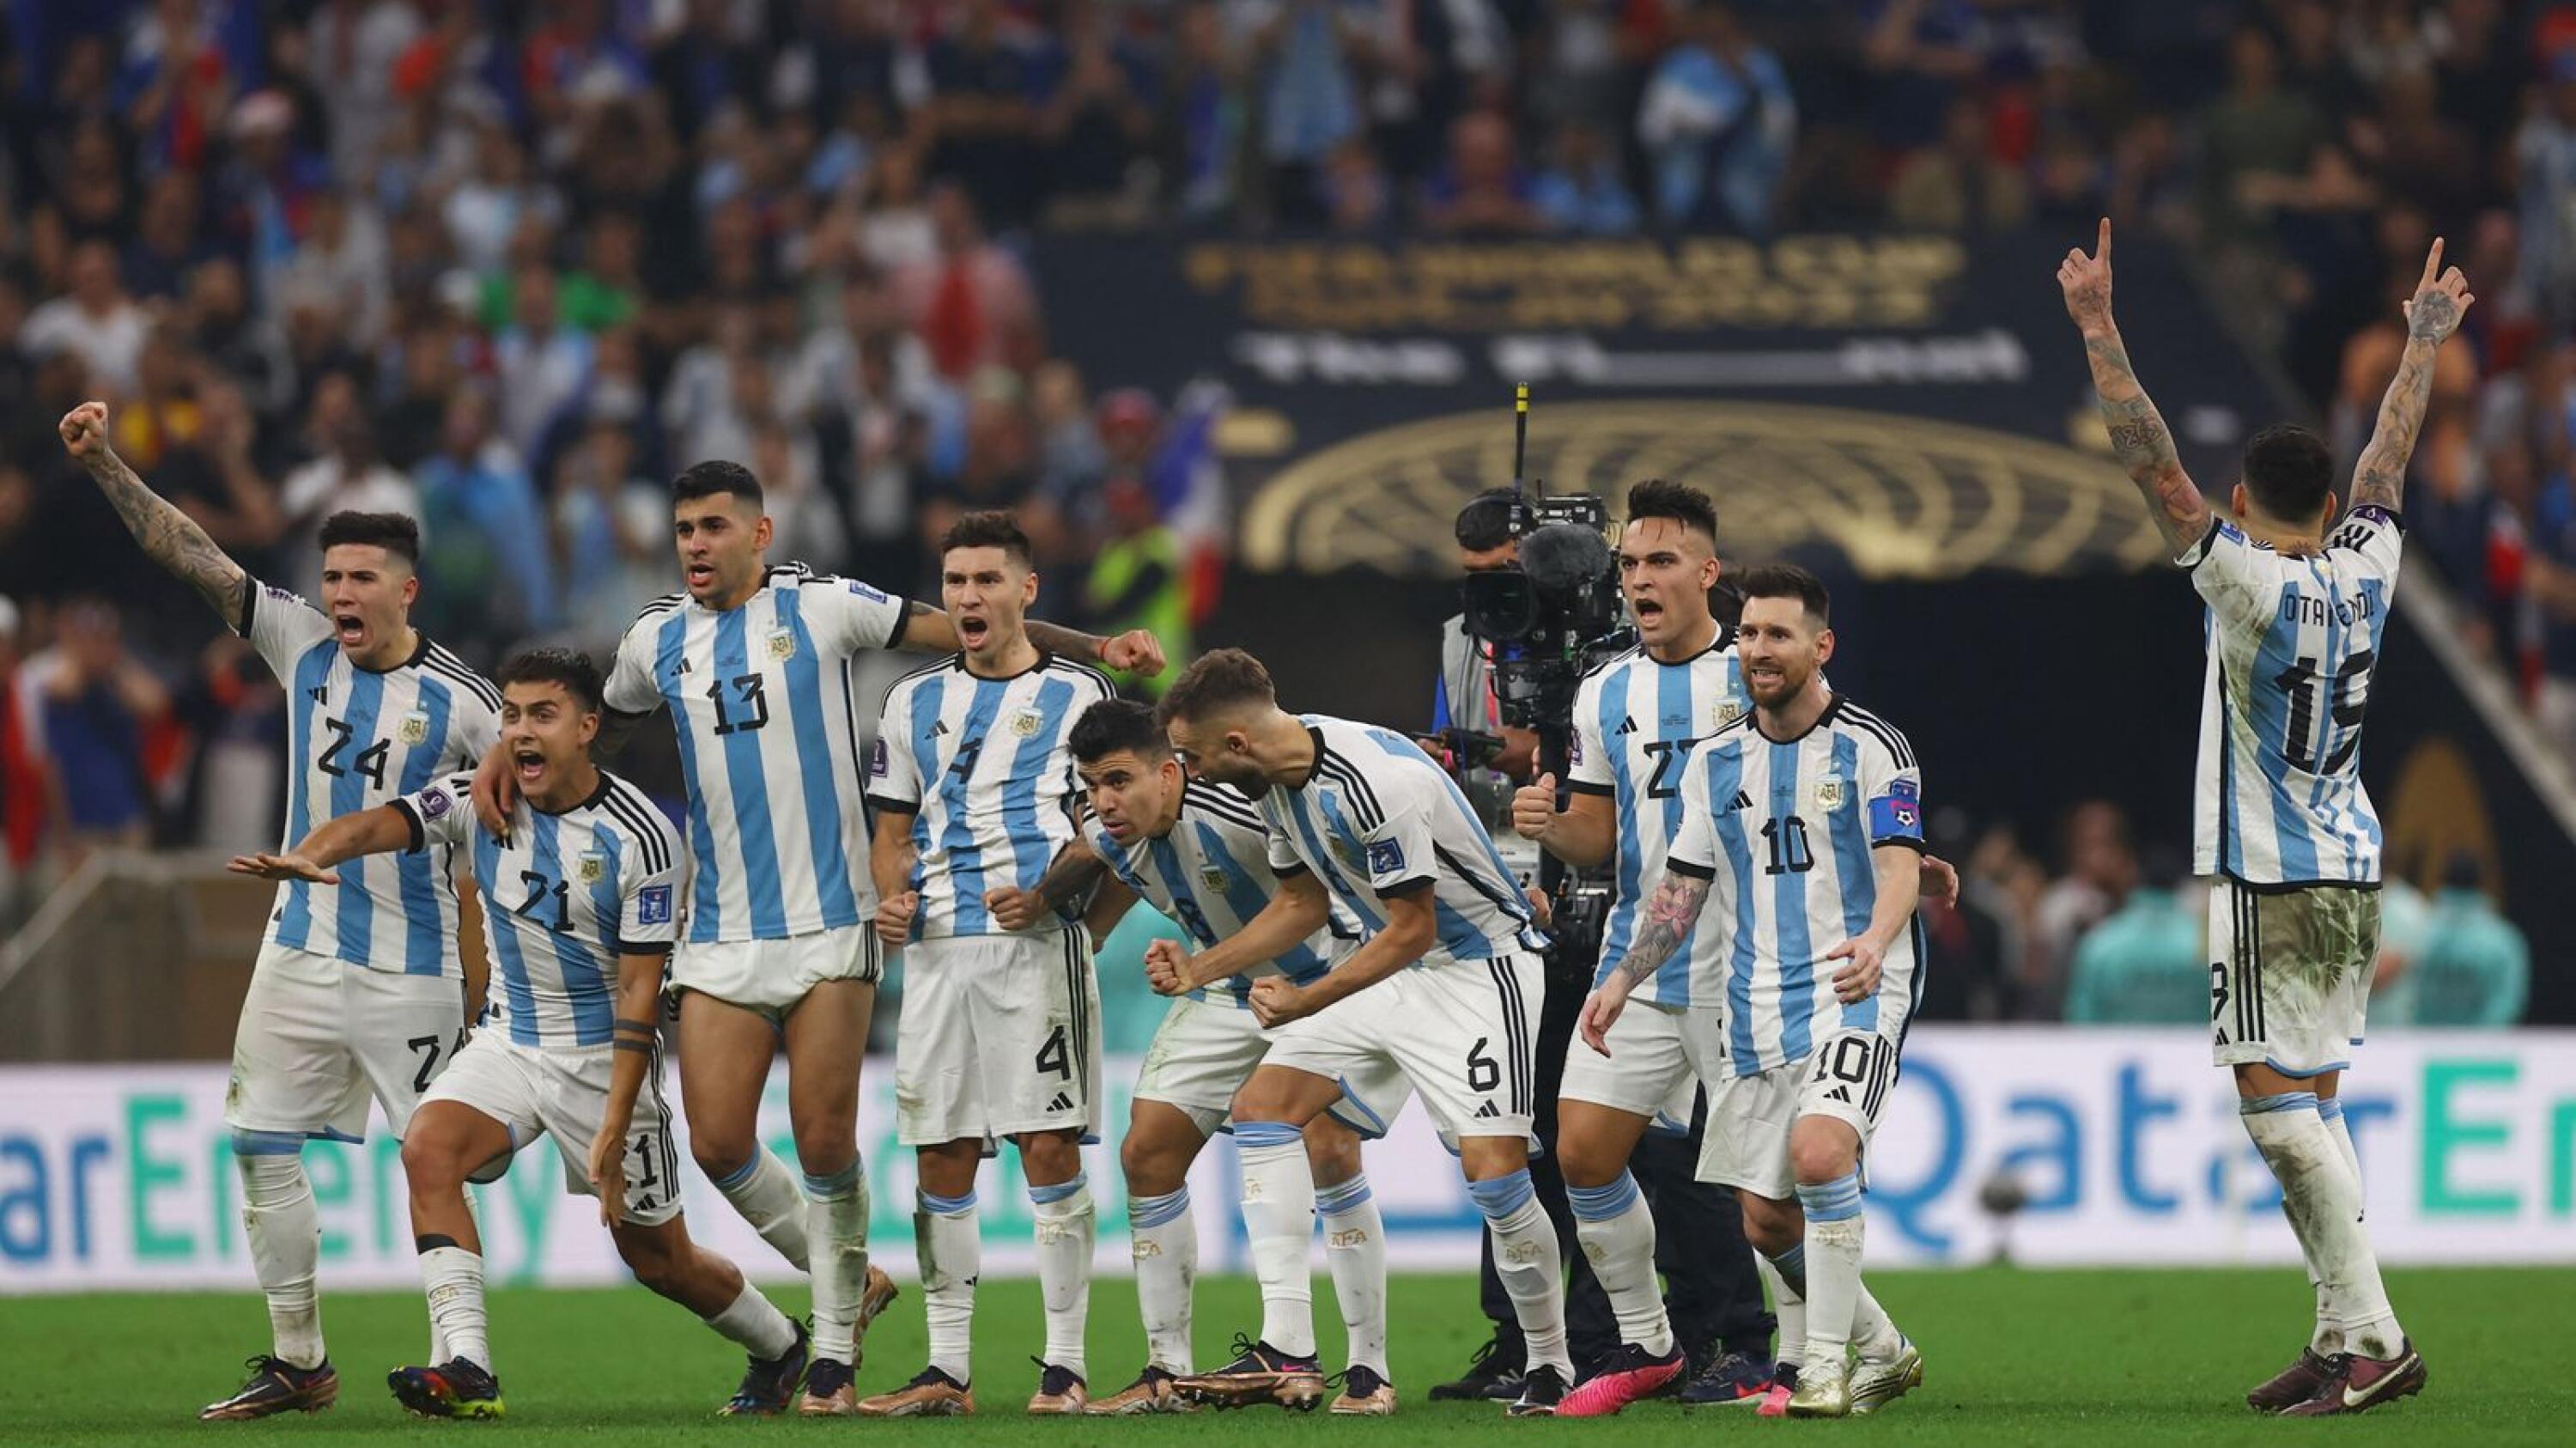 Argentina's Lionel Messi and teammates react after winning the penalty shootout in Sunday’s World Cup final against France in Lusail